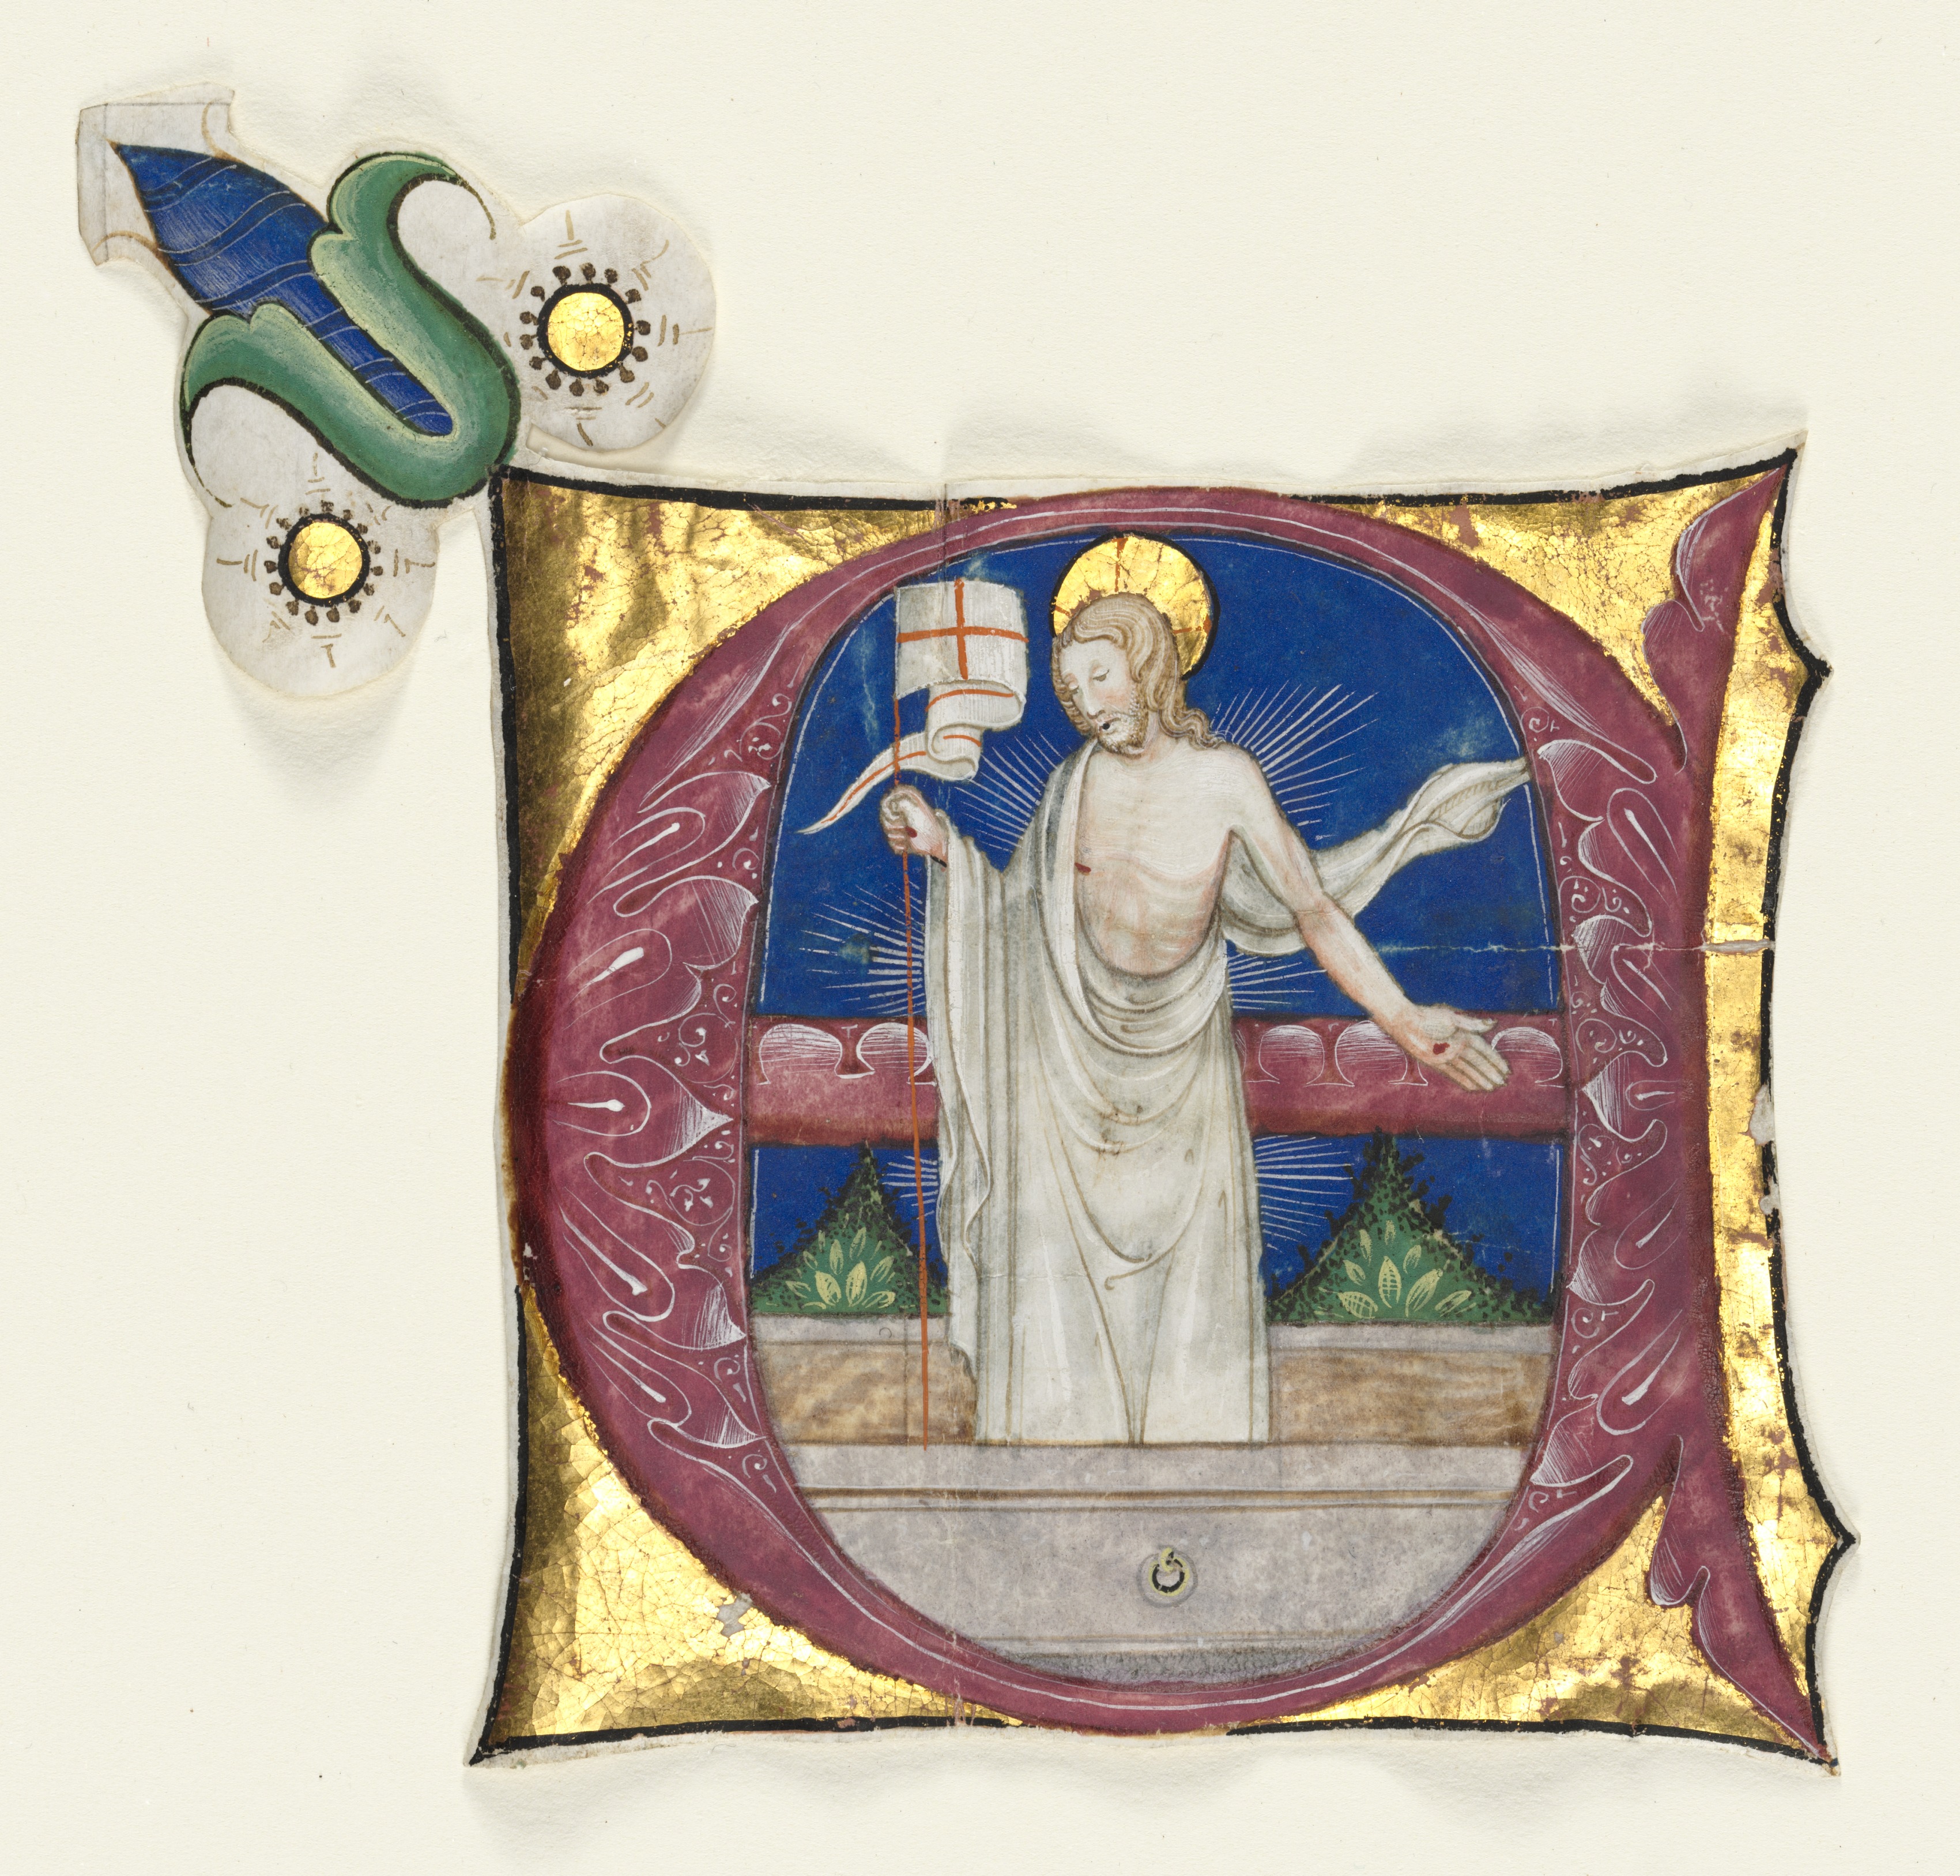 Historiated Initial (E) Excised from an Antiphonary: Risen Christ in the Tomb